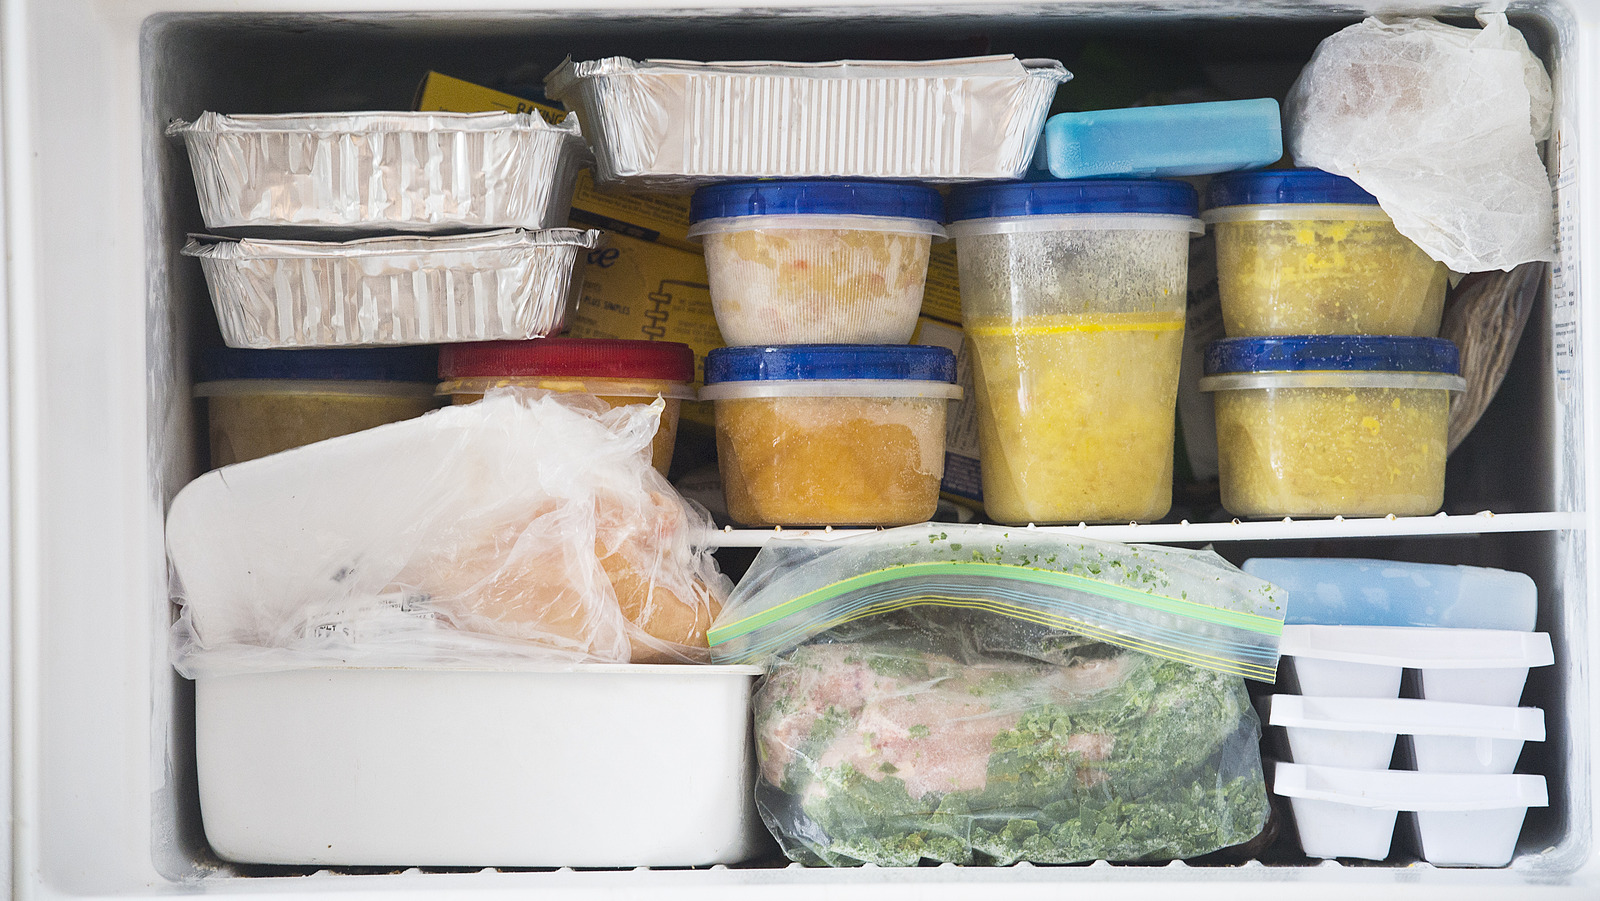 Follow These Rules If You Want To Pack Frozen Food In Your Luggage